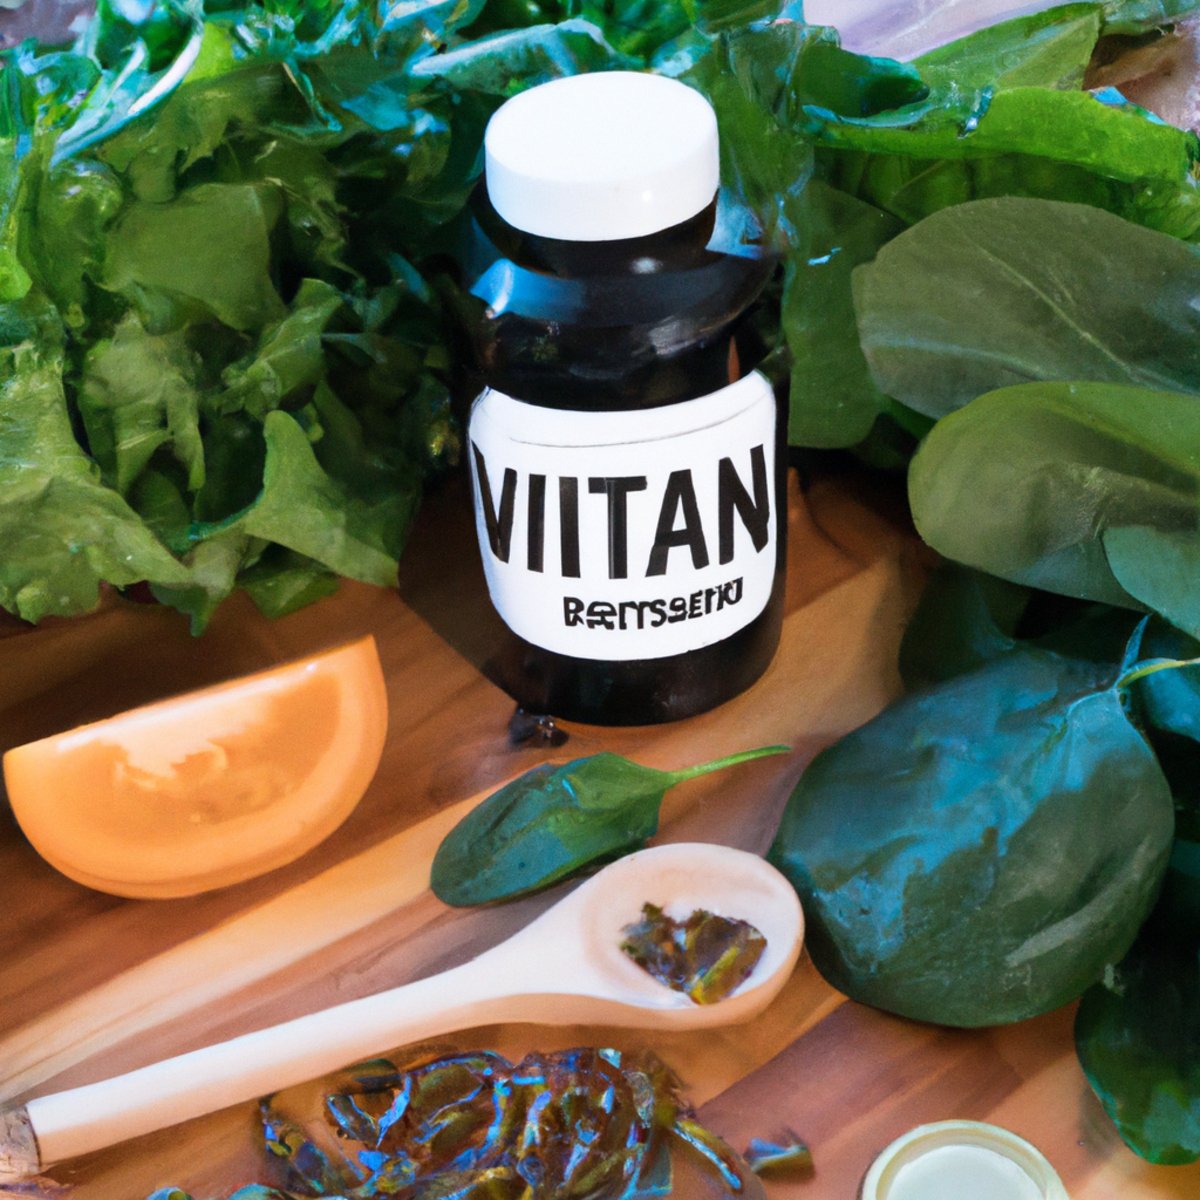 Vitamin E oil, leafy greens, carrots, and almonds on a table with a blurred person in the background.